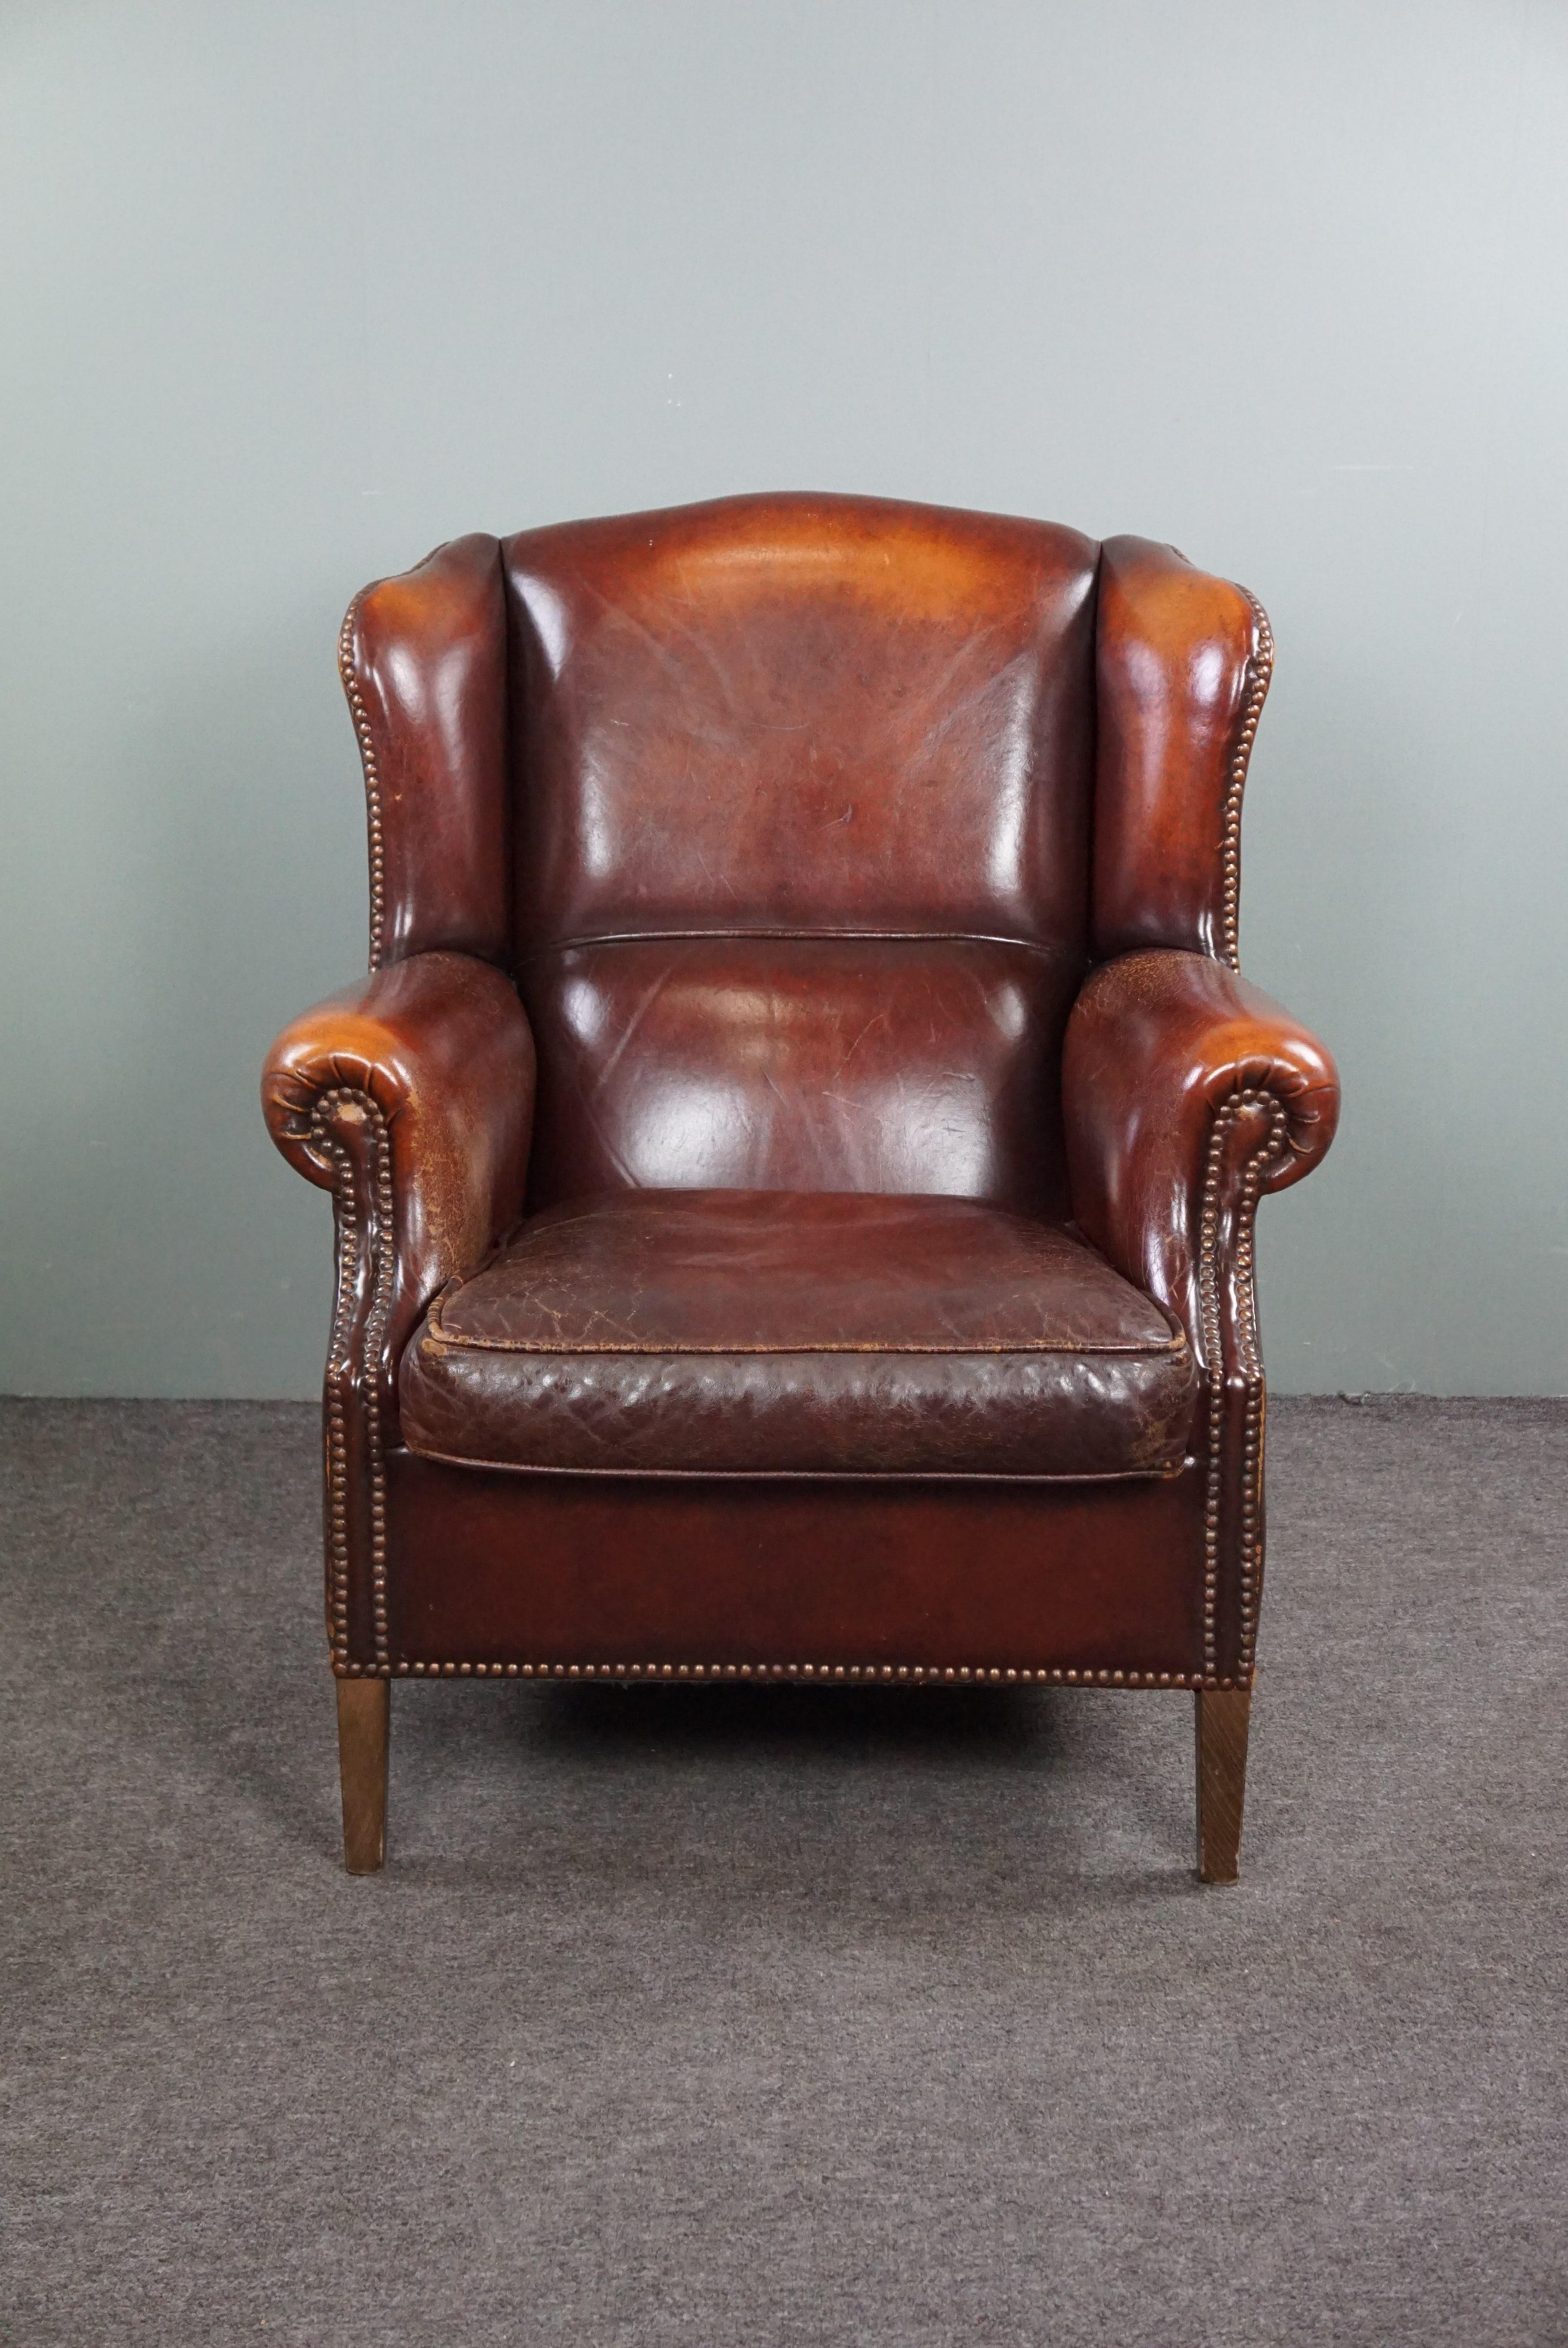 Offered is this beautiful warm-colored sheep leather wing chair finished with beautiful decorative nails.

This armchair has a strikingly beautiful warm brown/red color and a beautiful patina. The surface division in the backrest and the decorative